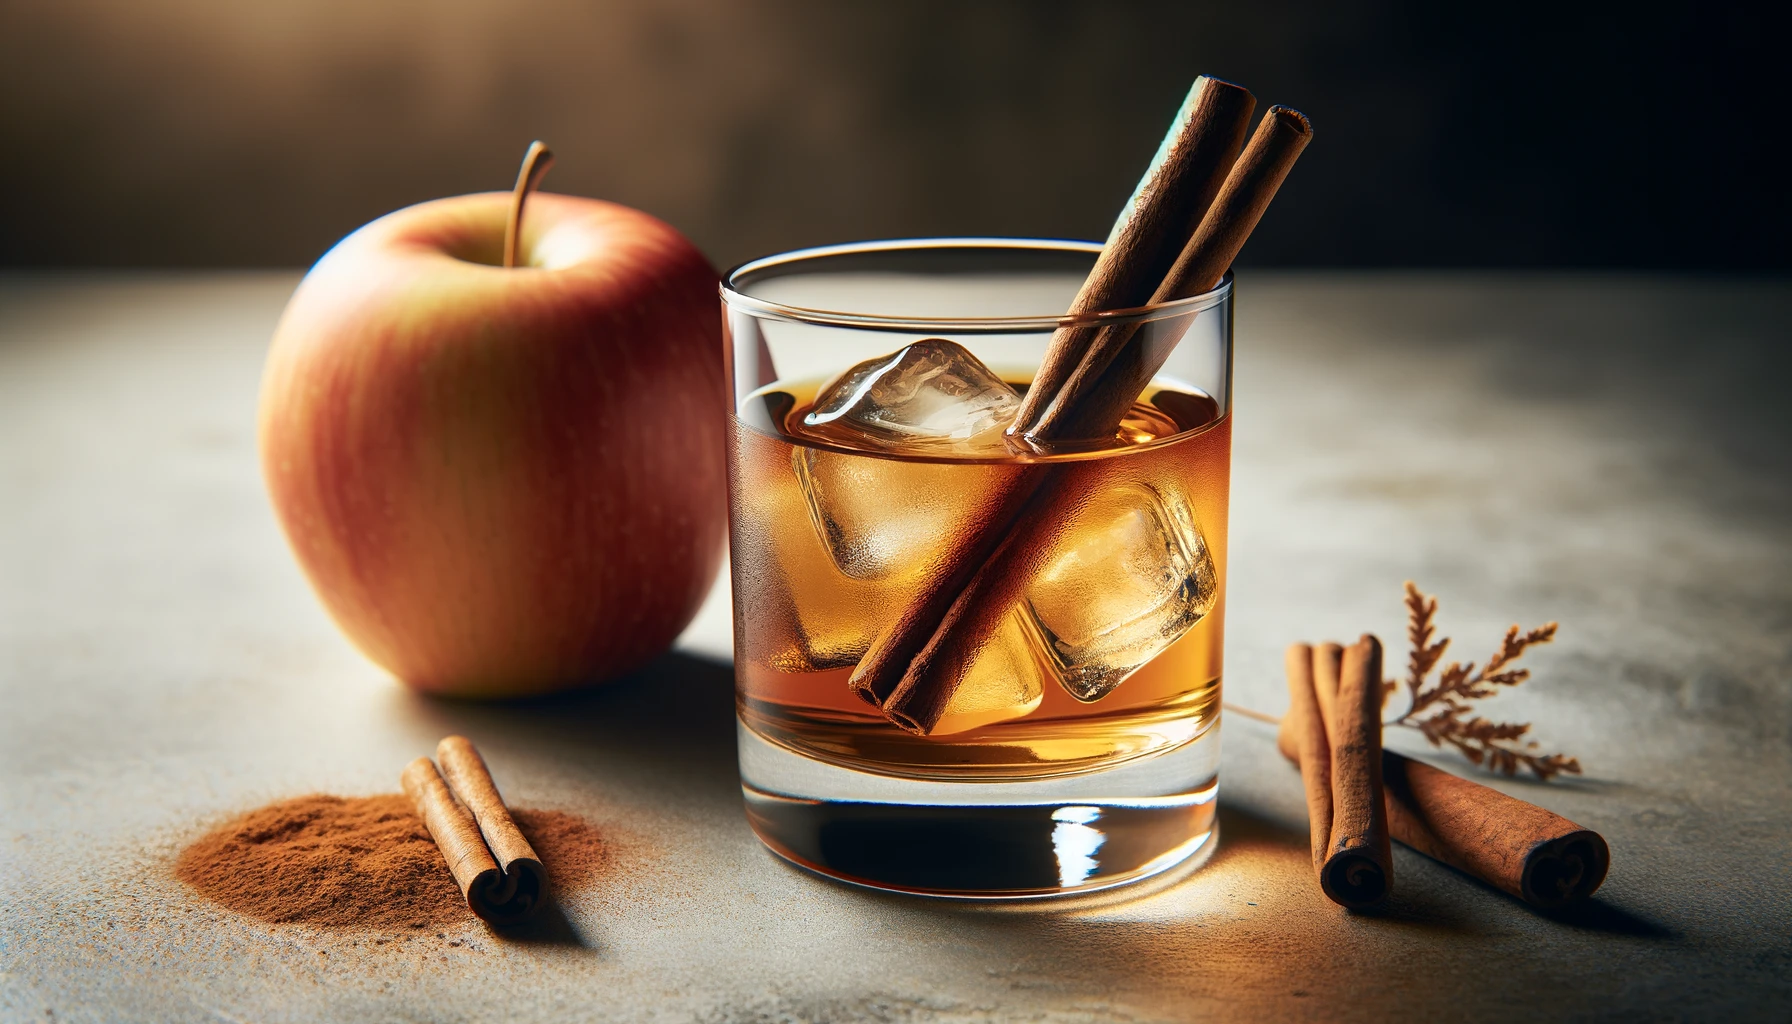 This cocktail has a delightful blend of sweet and sour, thanks to the incorporation of apple cider and whisky.